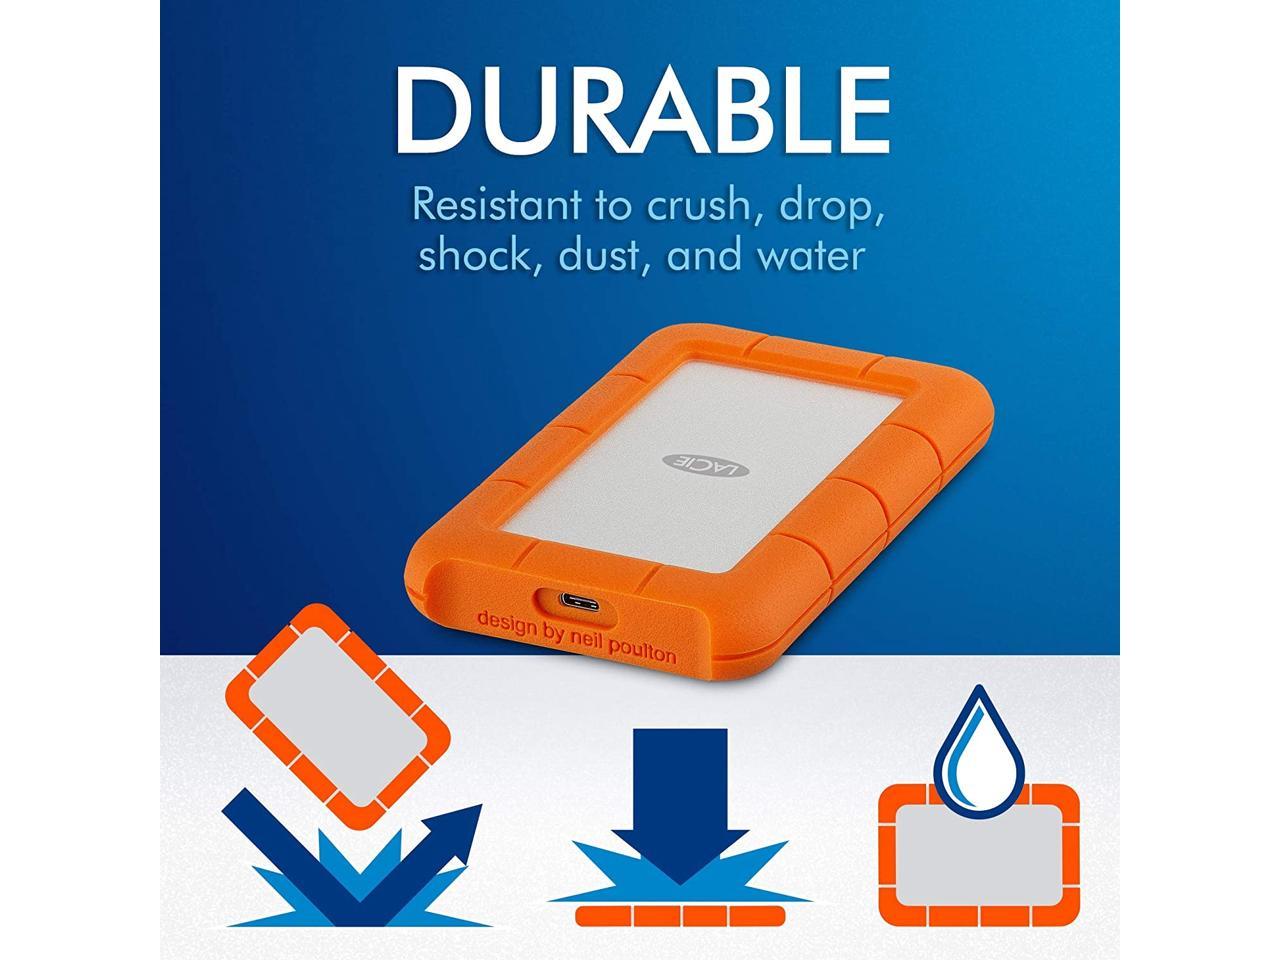 LaCie Rugged USB-C 2TB External Hard Drive Portable HDD – USB 3.0 compatible, Drop Shock Dust Rain Resistant, for Mac and PC Computer Desktop Workstation Laptop, 1 Month Adobe CC (STFR2000800)